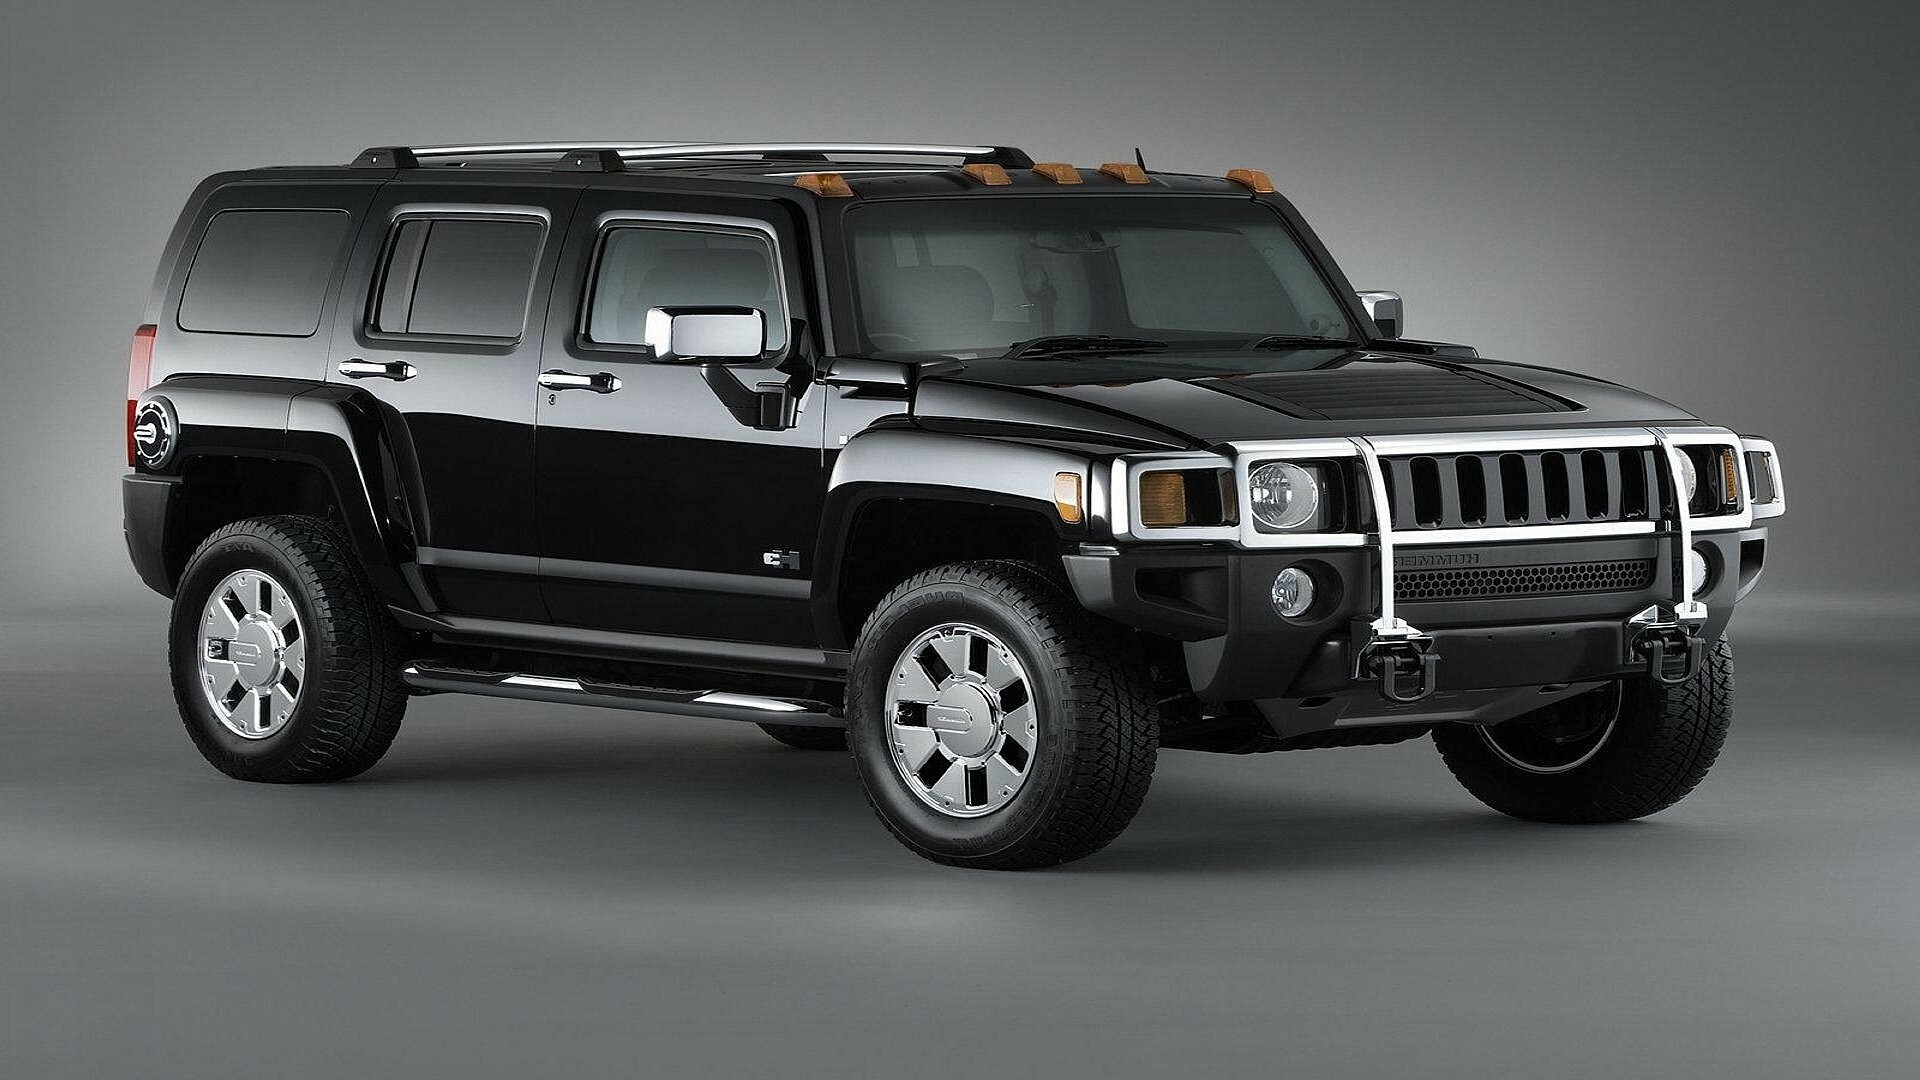 Hummer: The first two H1 models to be sold were purchased by Arnold Schwarzenegger. 1920x1080 Full HD Background.